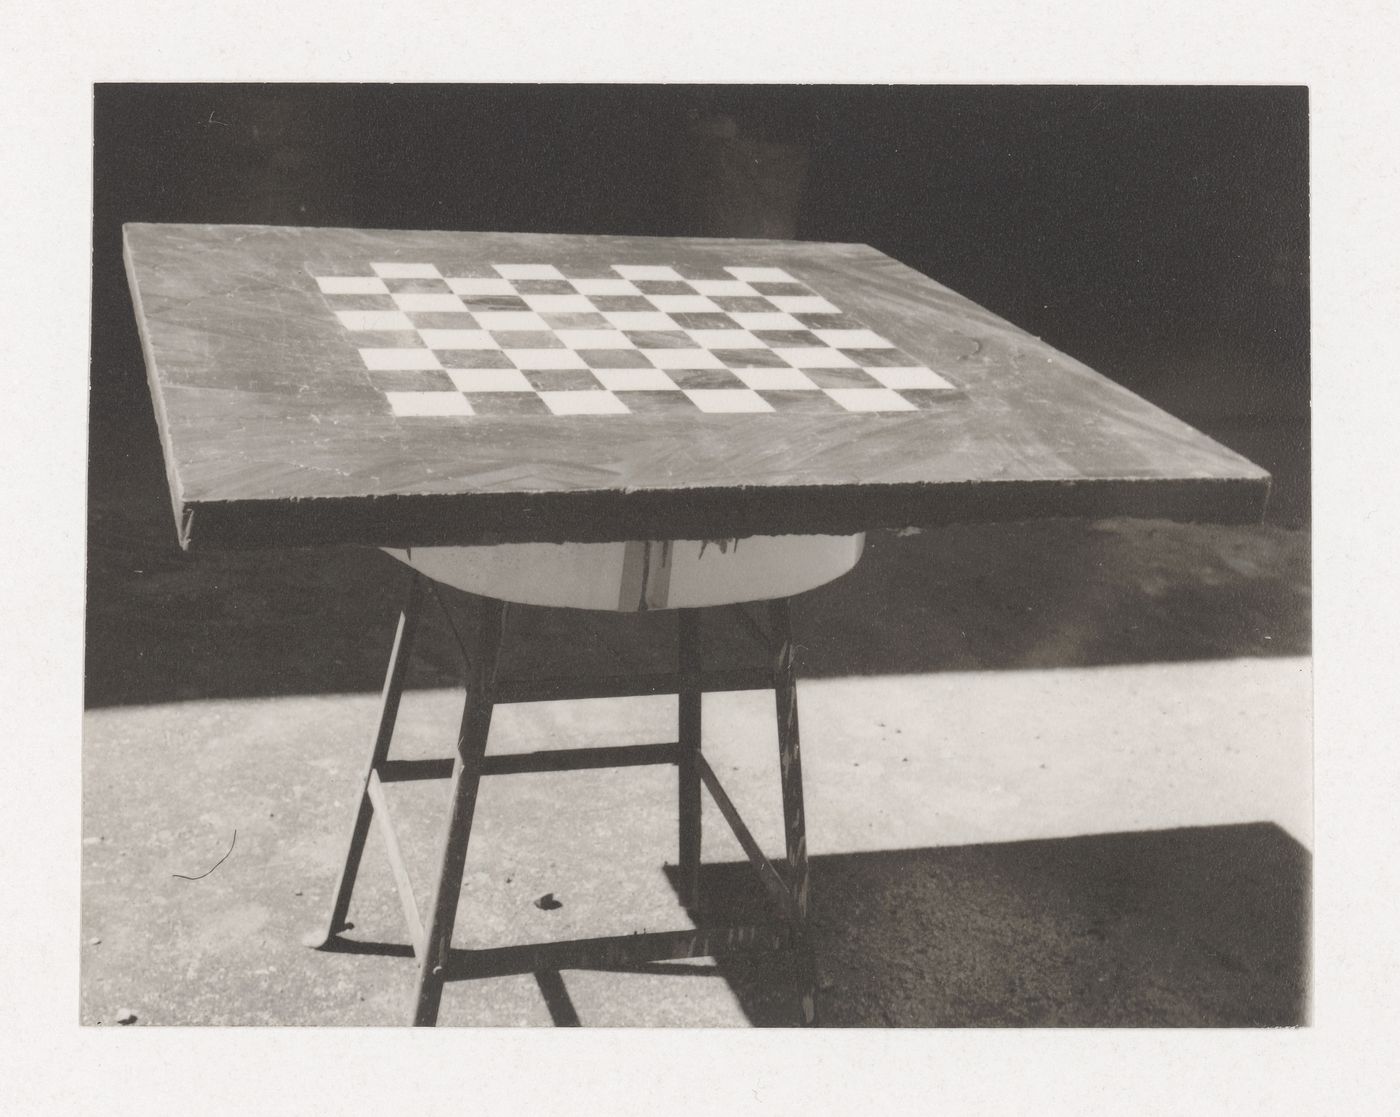 Chess table made from sulphur concrete